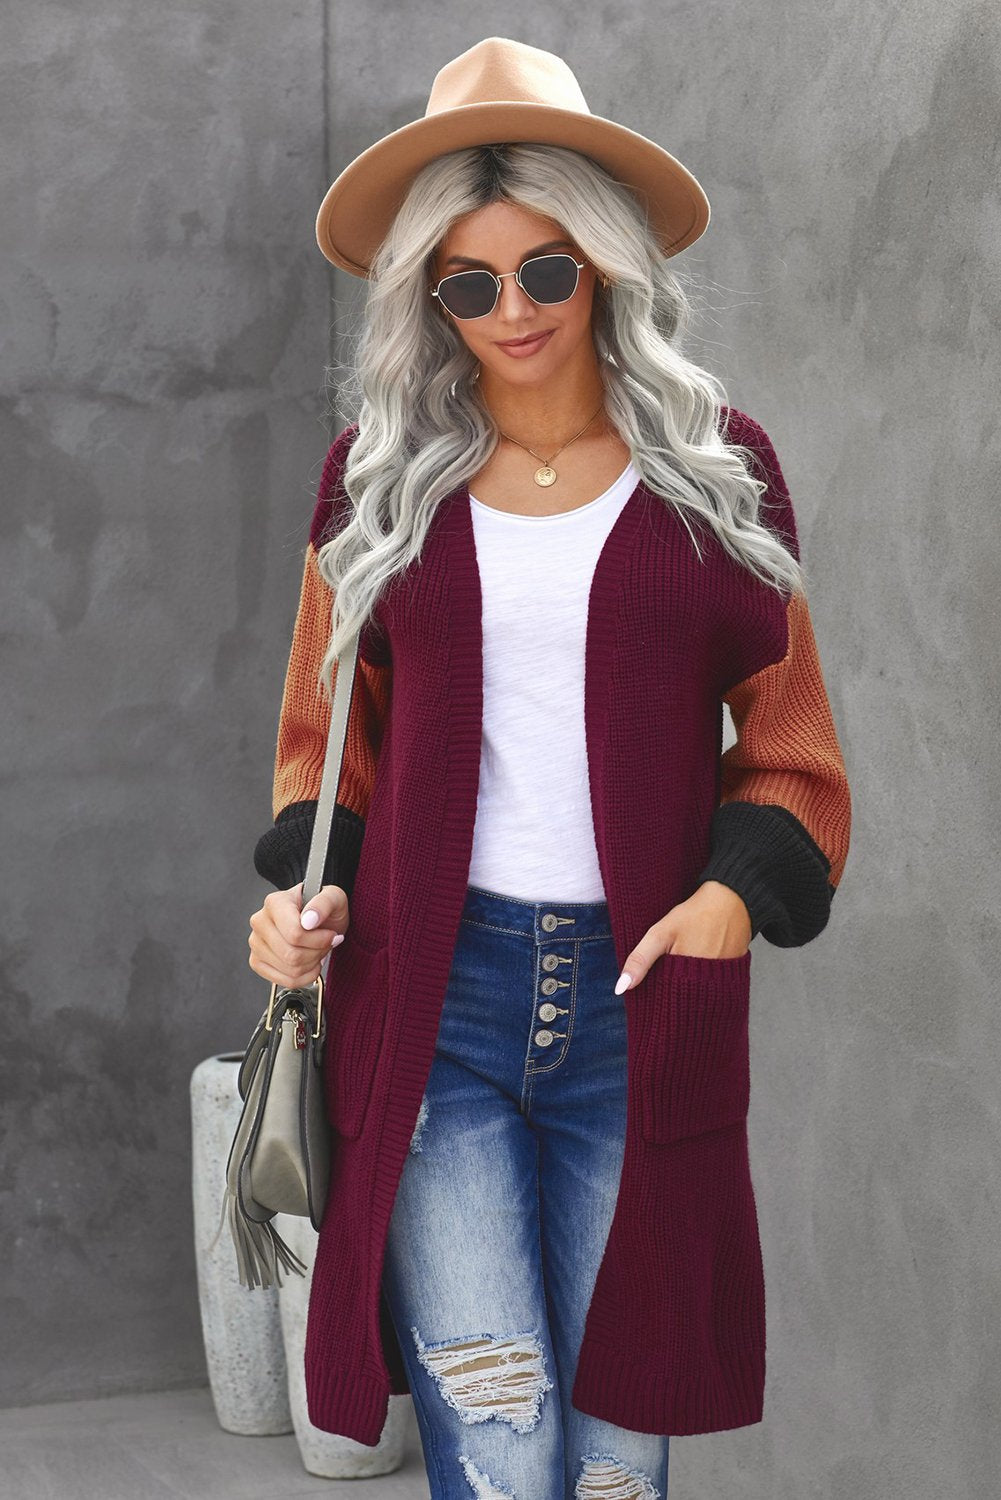 Women's Red Cotton-blend Pocketed Colorblock CardiganWomen's Red Cotton-blend Pocketed Colorblock Cardigan